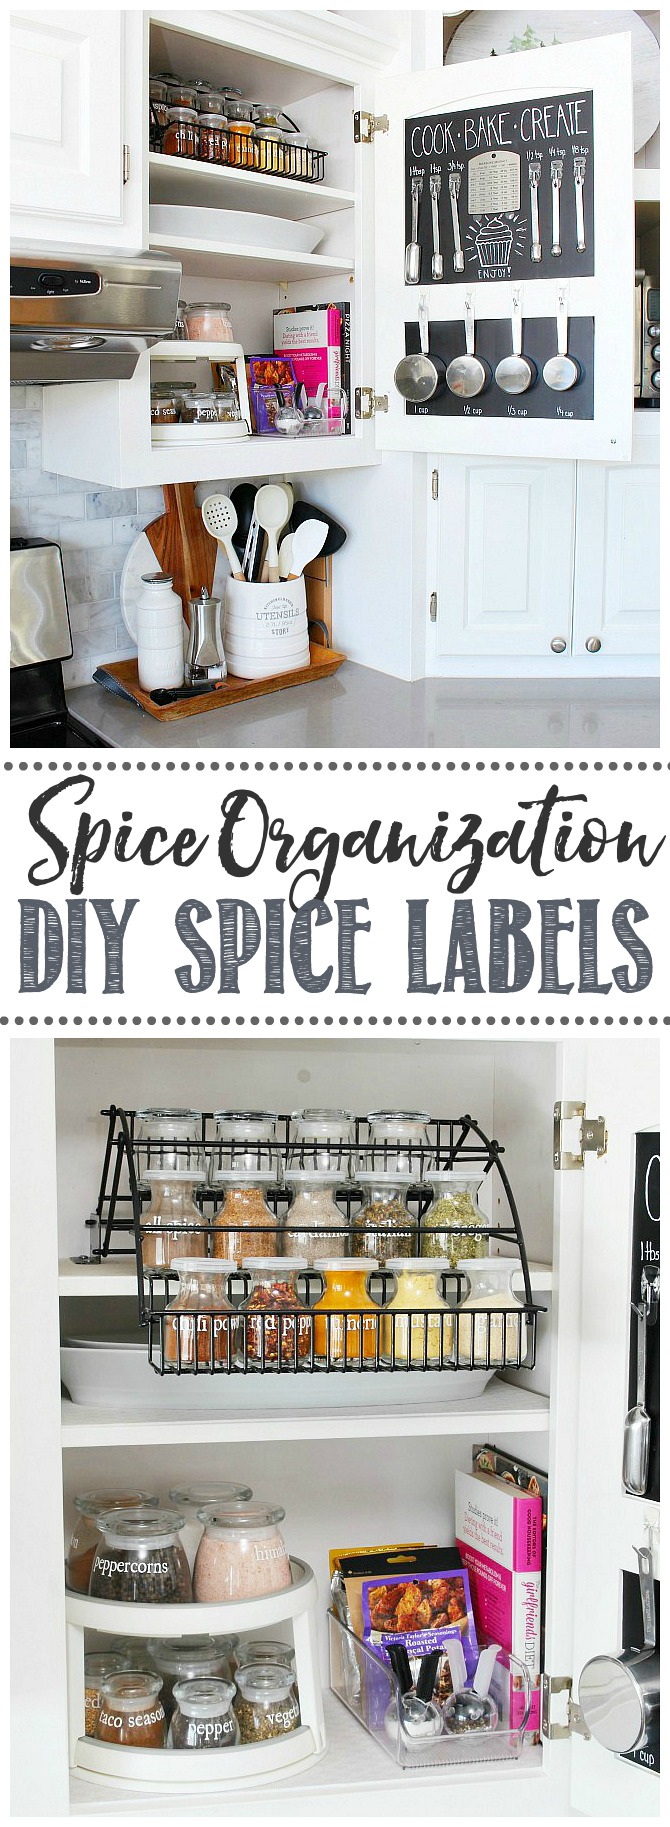 https://www.cleanandscentsible.com/wp-content/uploads/2019/04/Spice-organization-ideas-and-DIY-spice-labels.jpg